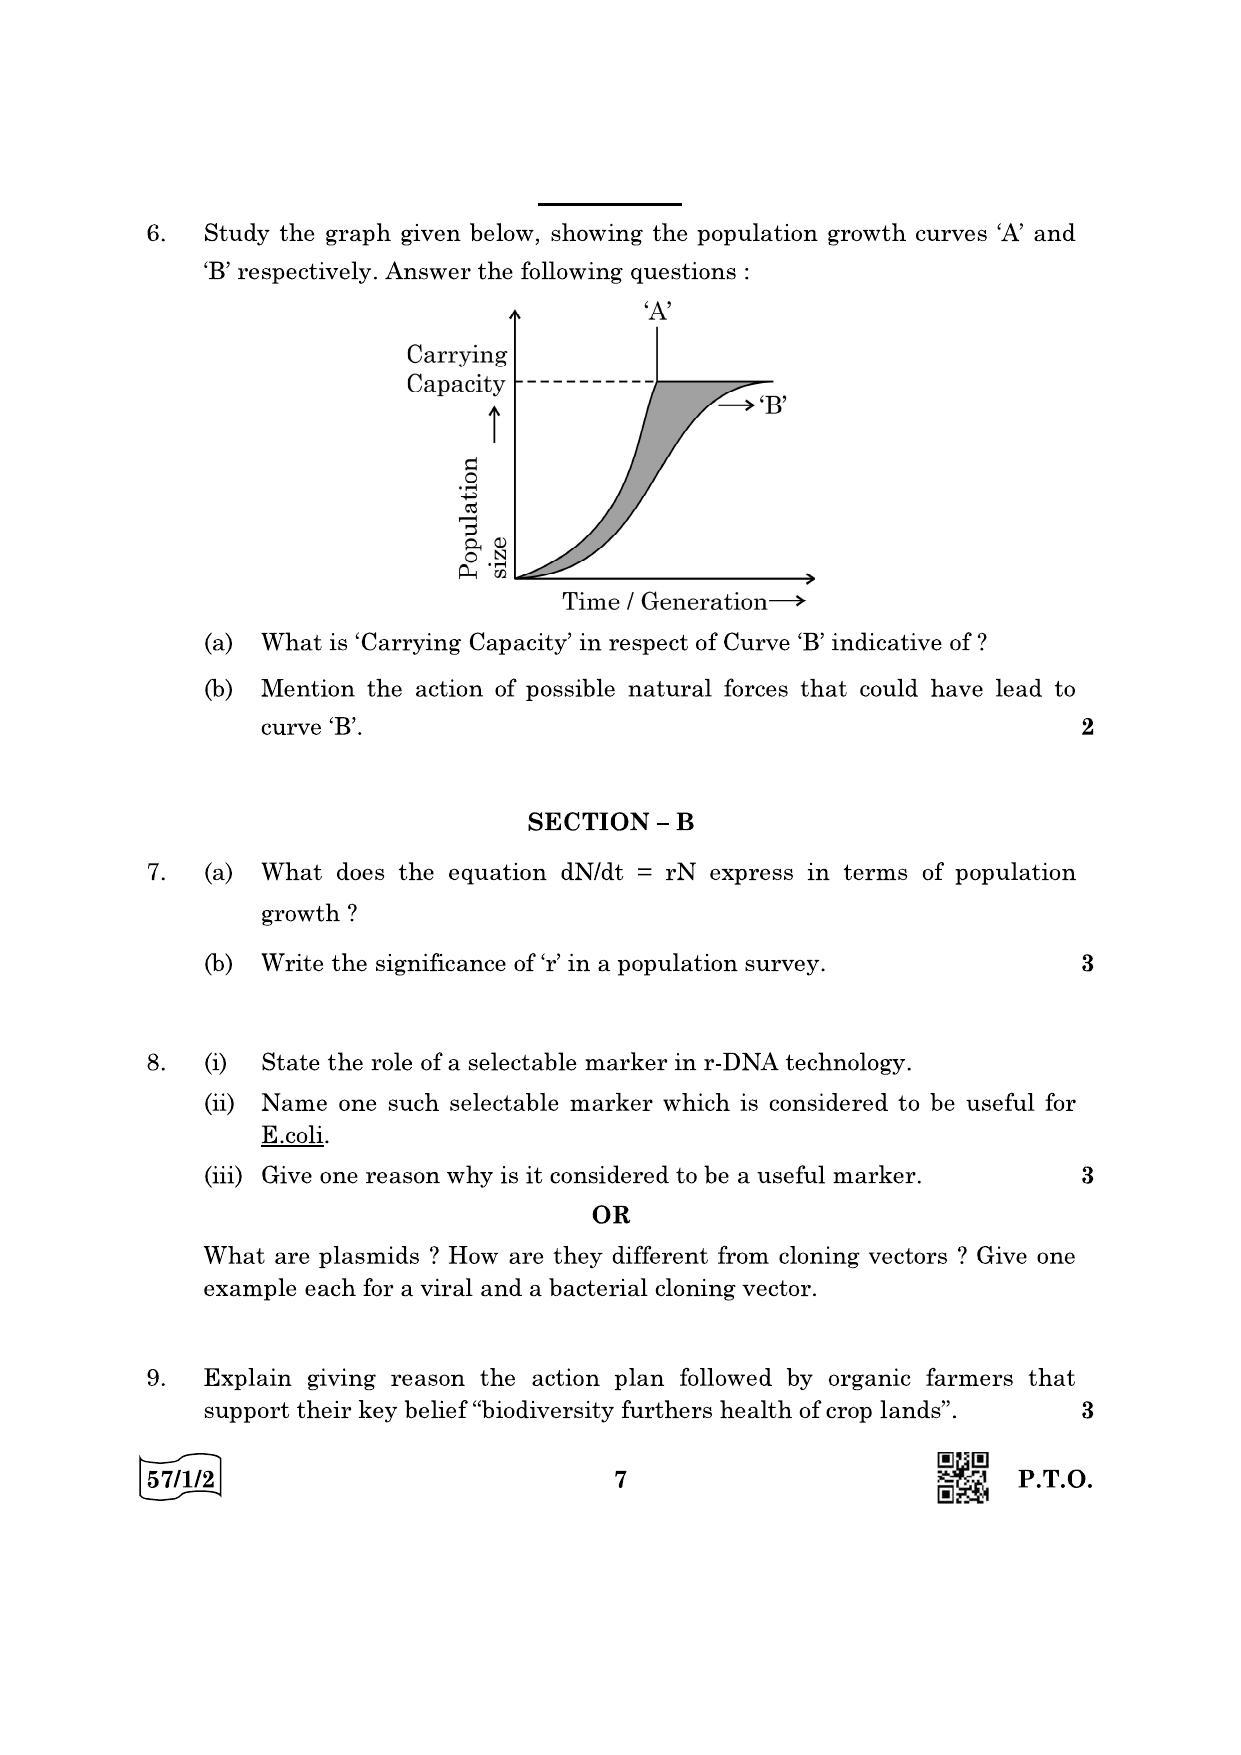 CBSE Class 12 57-1-2 Biology 2022 Question Paper - Page 7